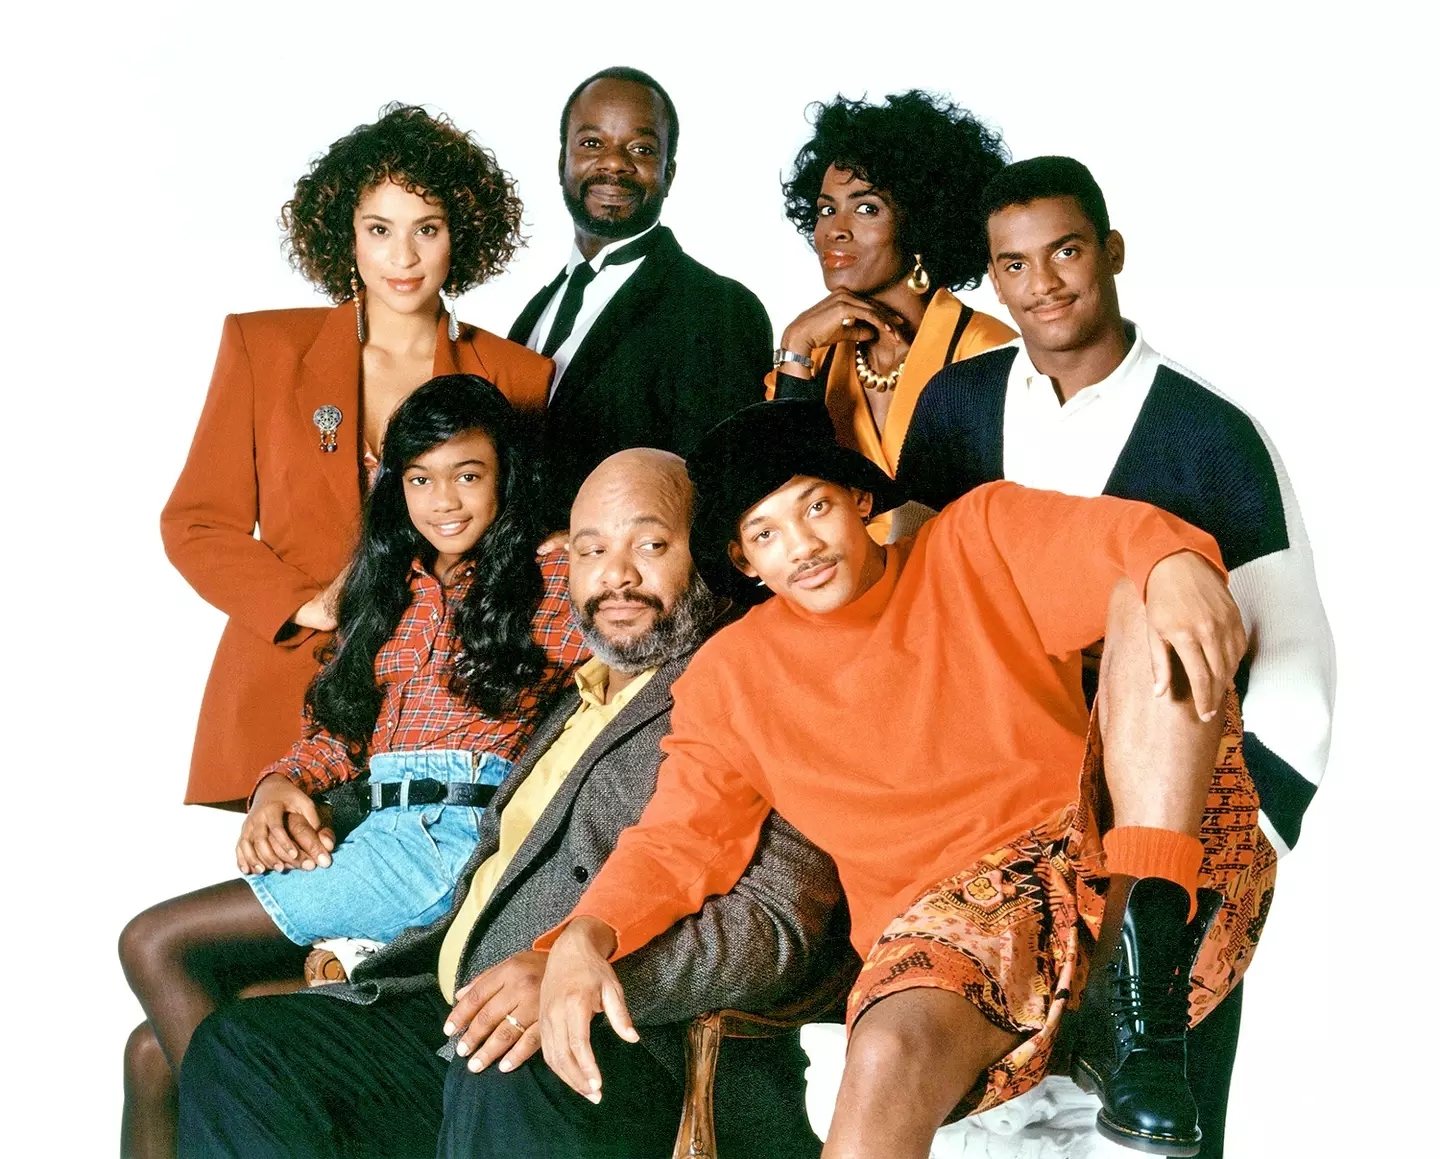 Will Smith and the Fresh Prince of Bel-Air cast.